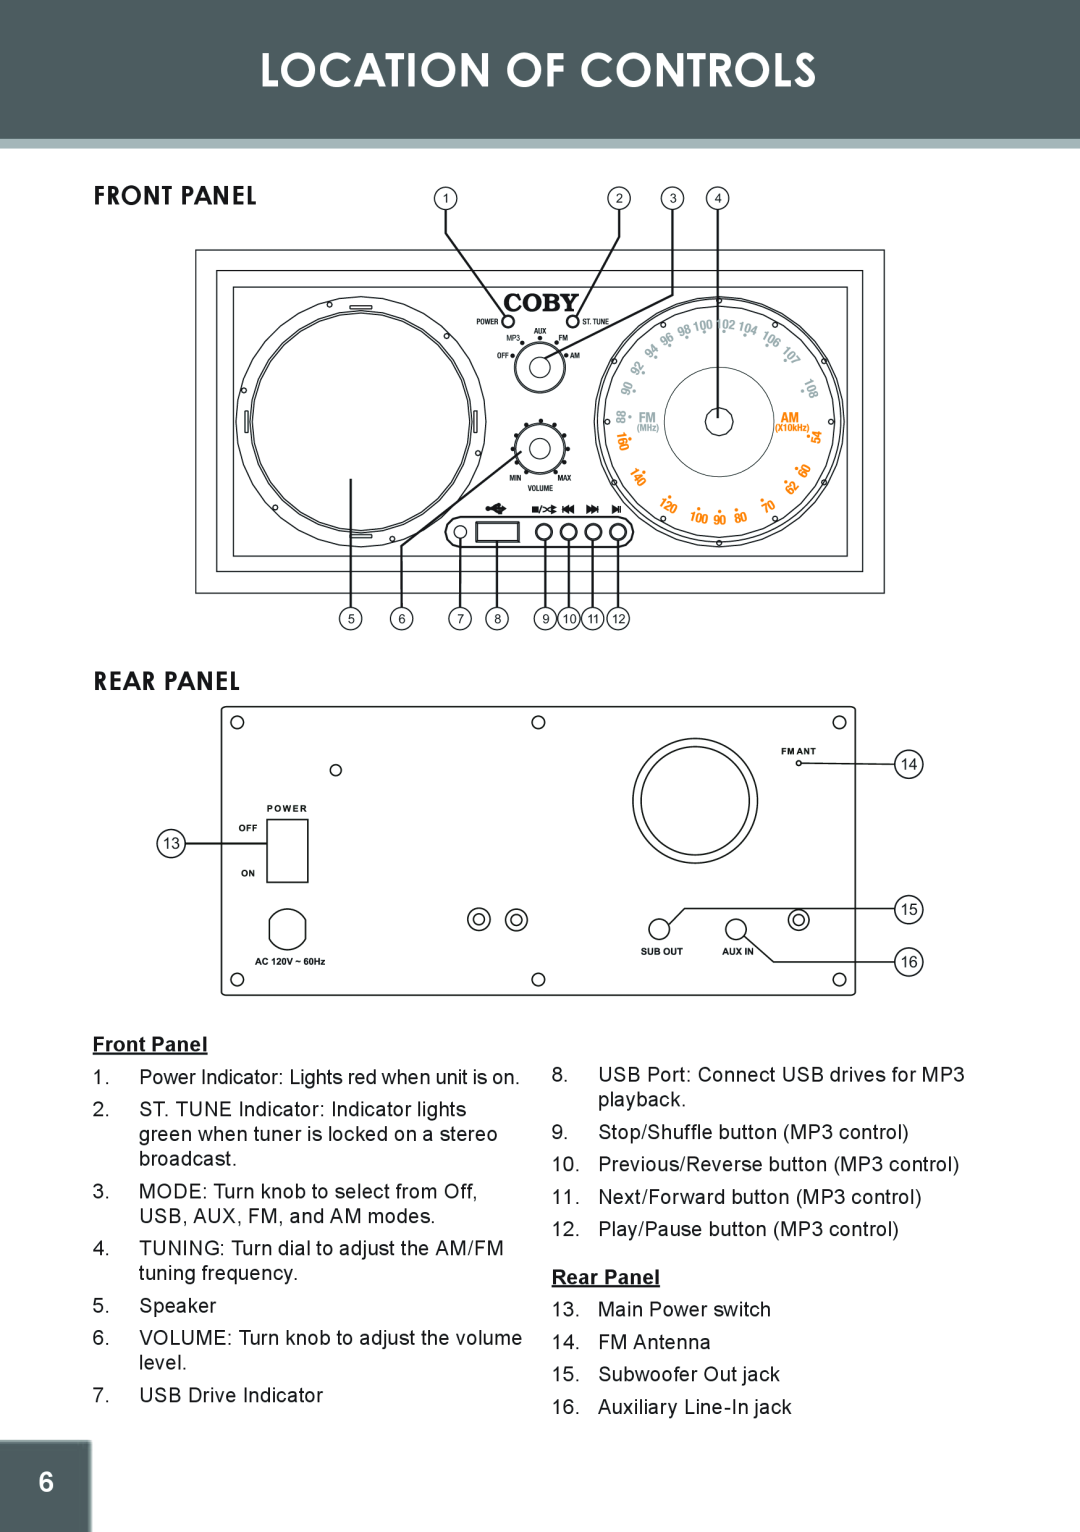 COBY electronic CX-166 instruction manual Location Of Controls, Rear Panel, Front Panel 